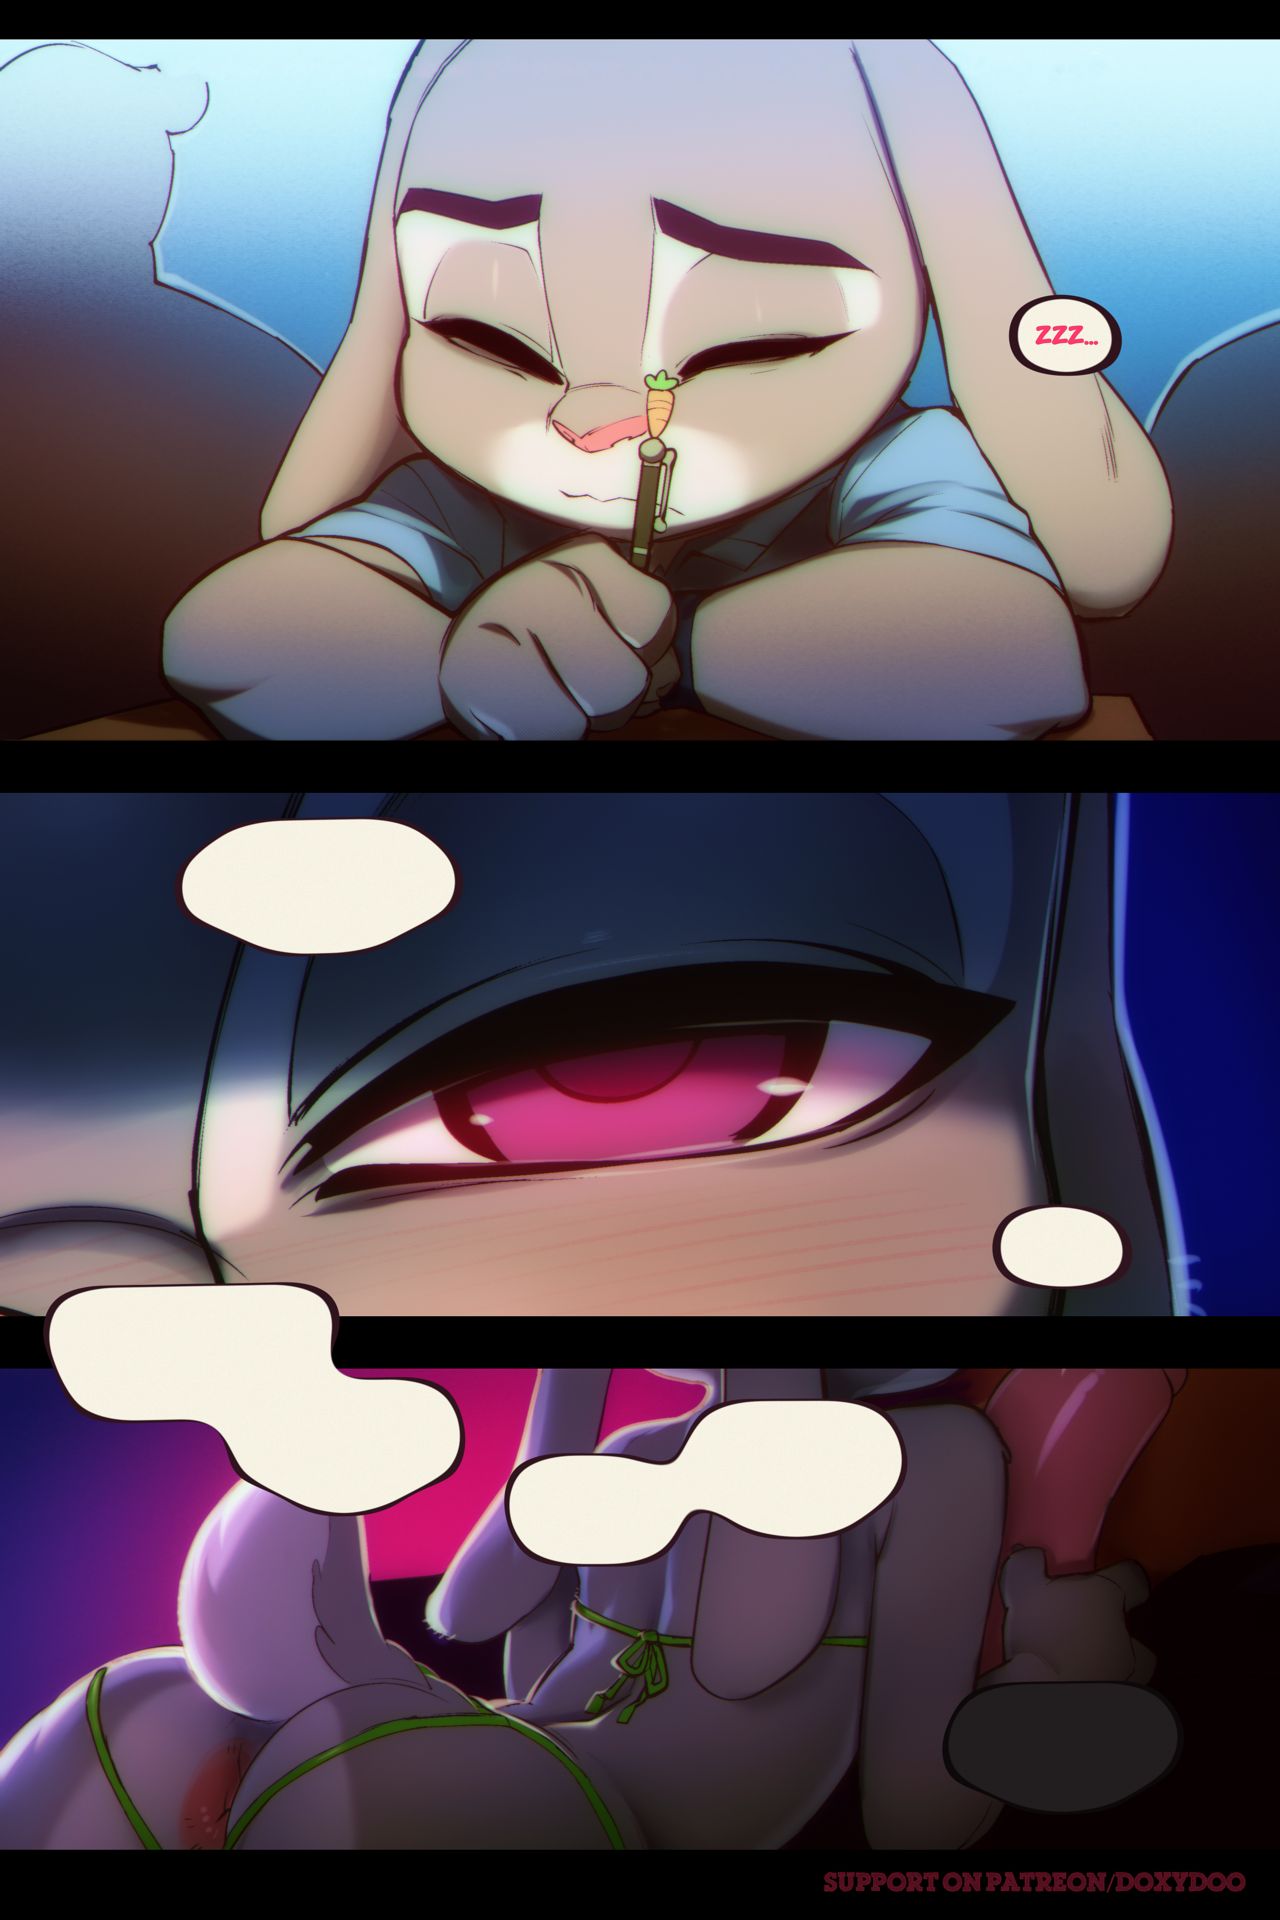 [Doxy] Sweet Sting Part 2: Down The Rabbit Hole (Zootopia) [Textless] [Ongoing] 